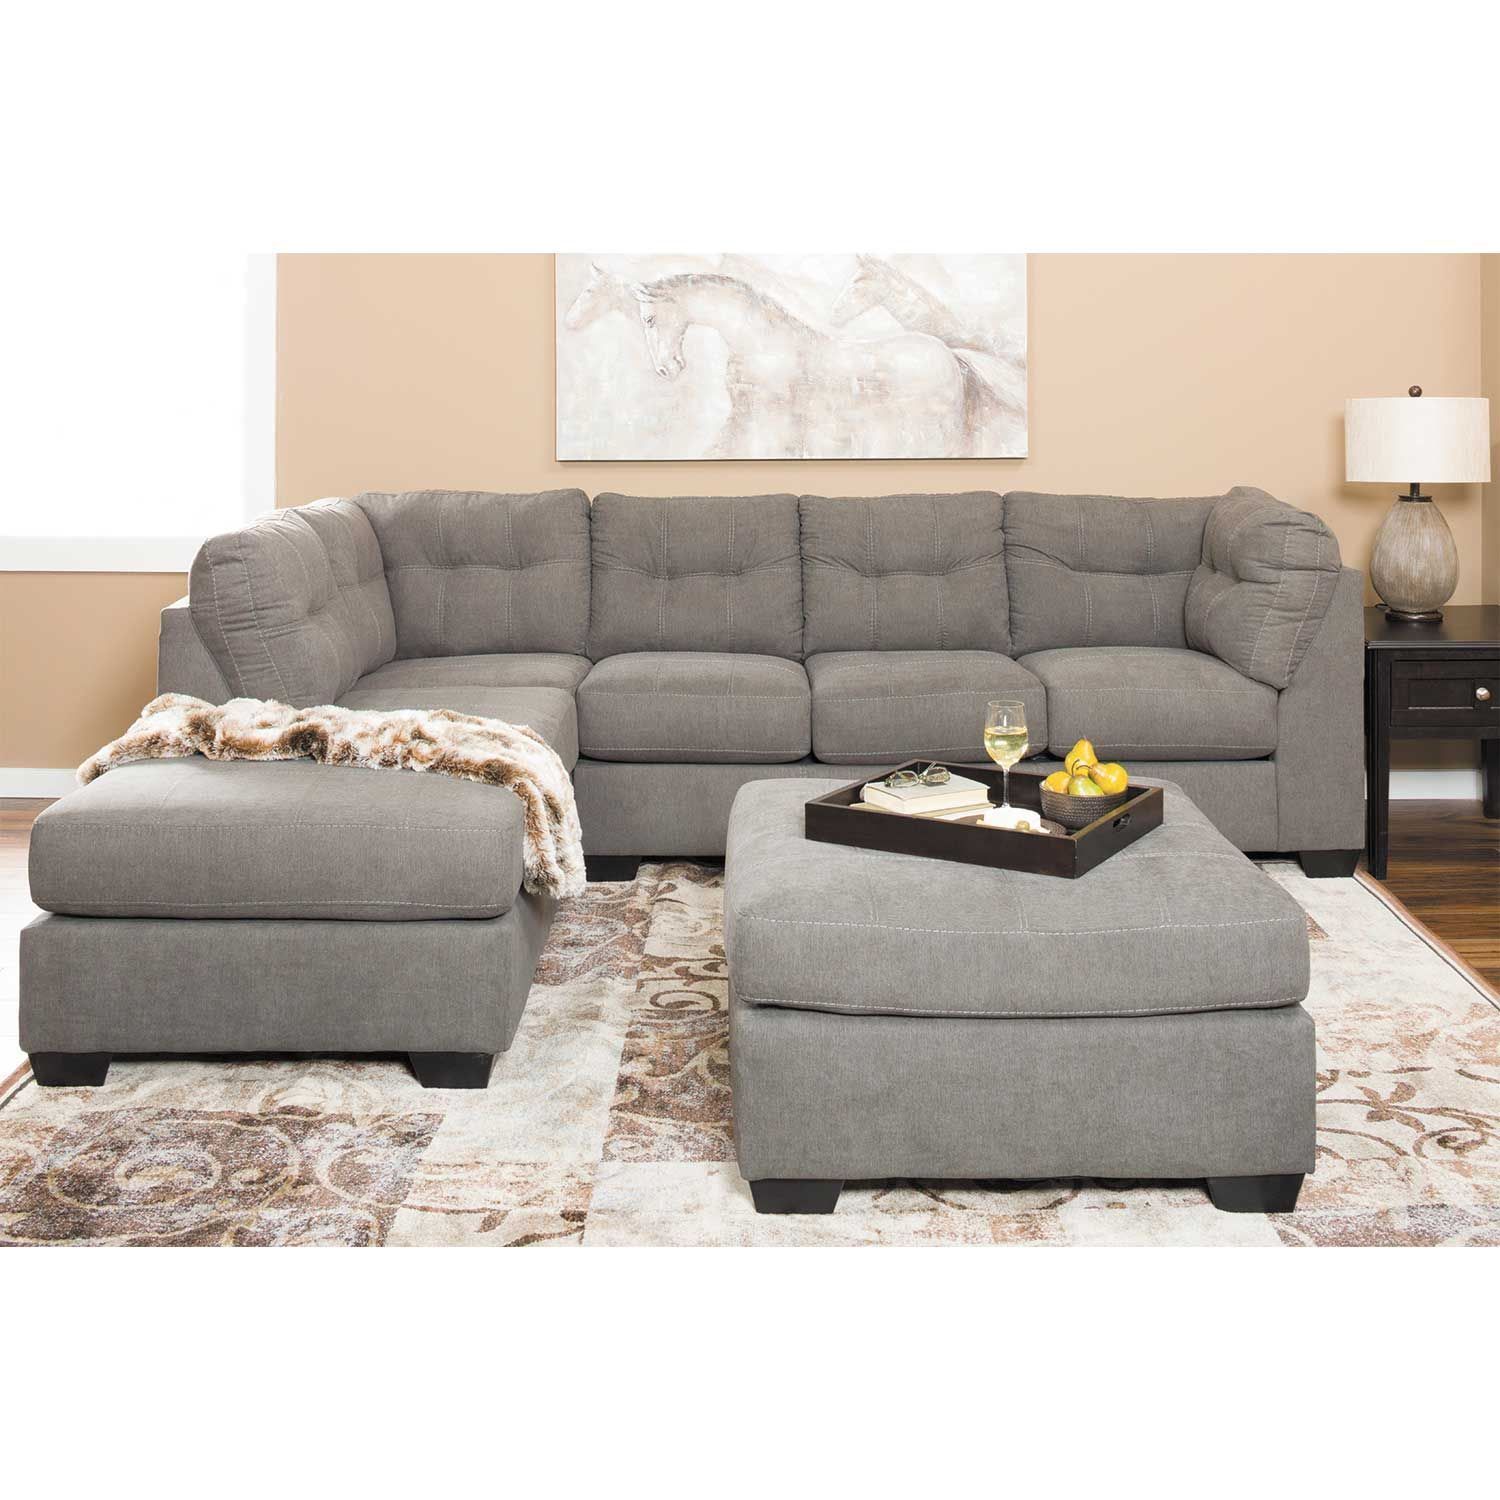 Maier Charcoal 2 Piece Sectional With Raf Chaise 4520017 With Regard To 2Pc Burland Contemporary Sectional Sofas Charcoal (View 1 of 15)